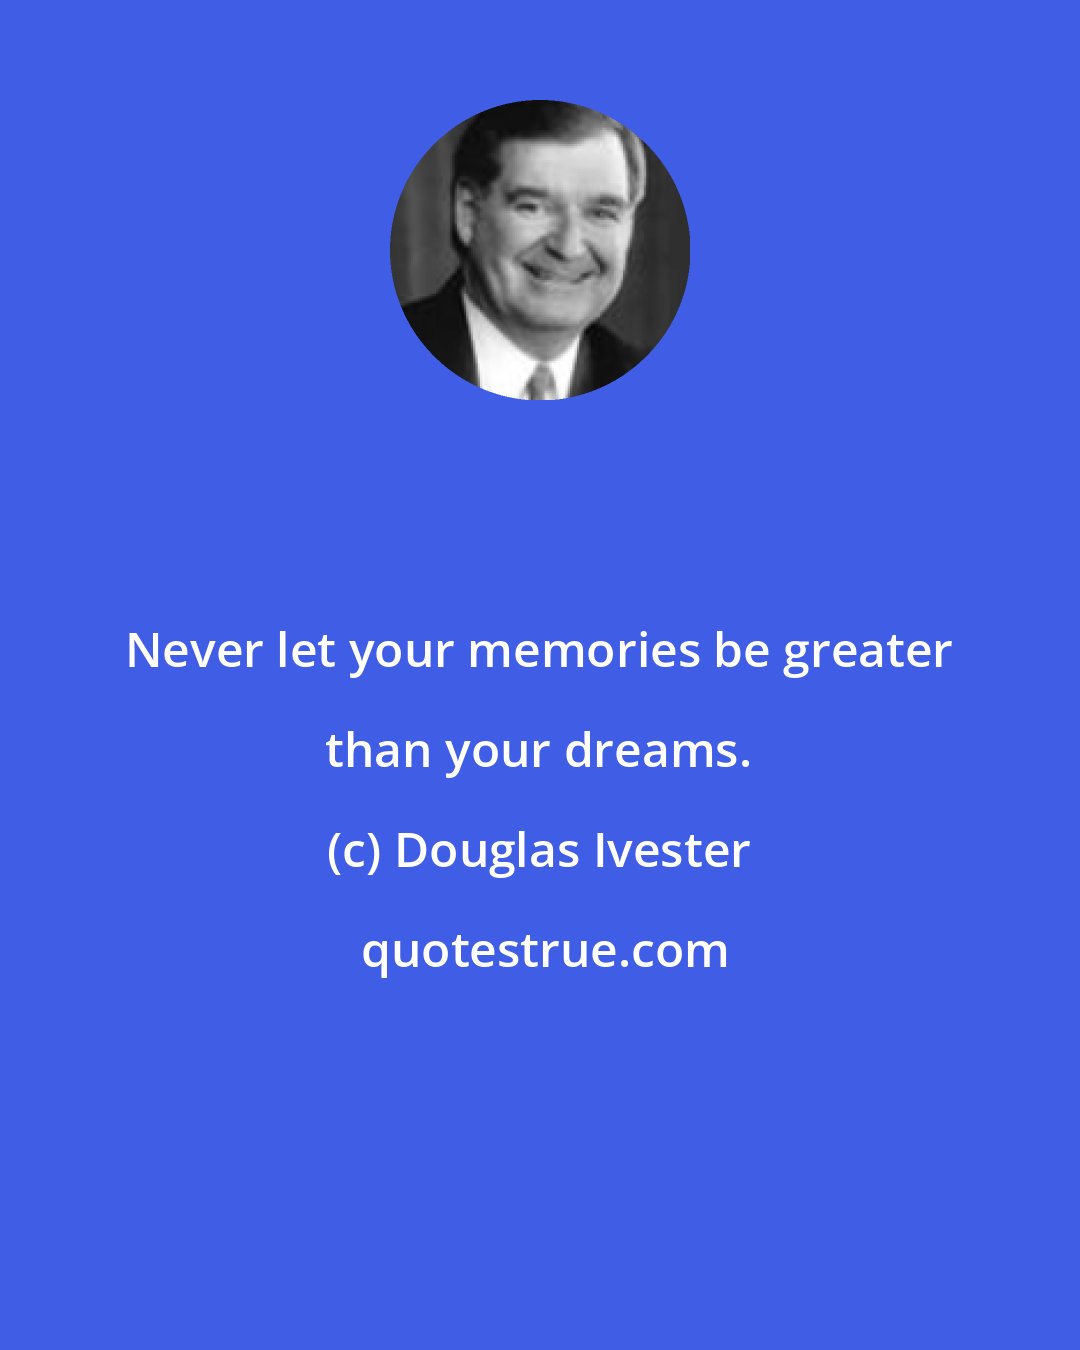 Douglas Ivester: Never let your memories be greater than your dreams.